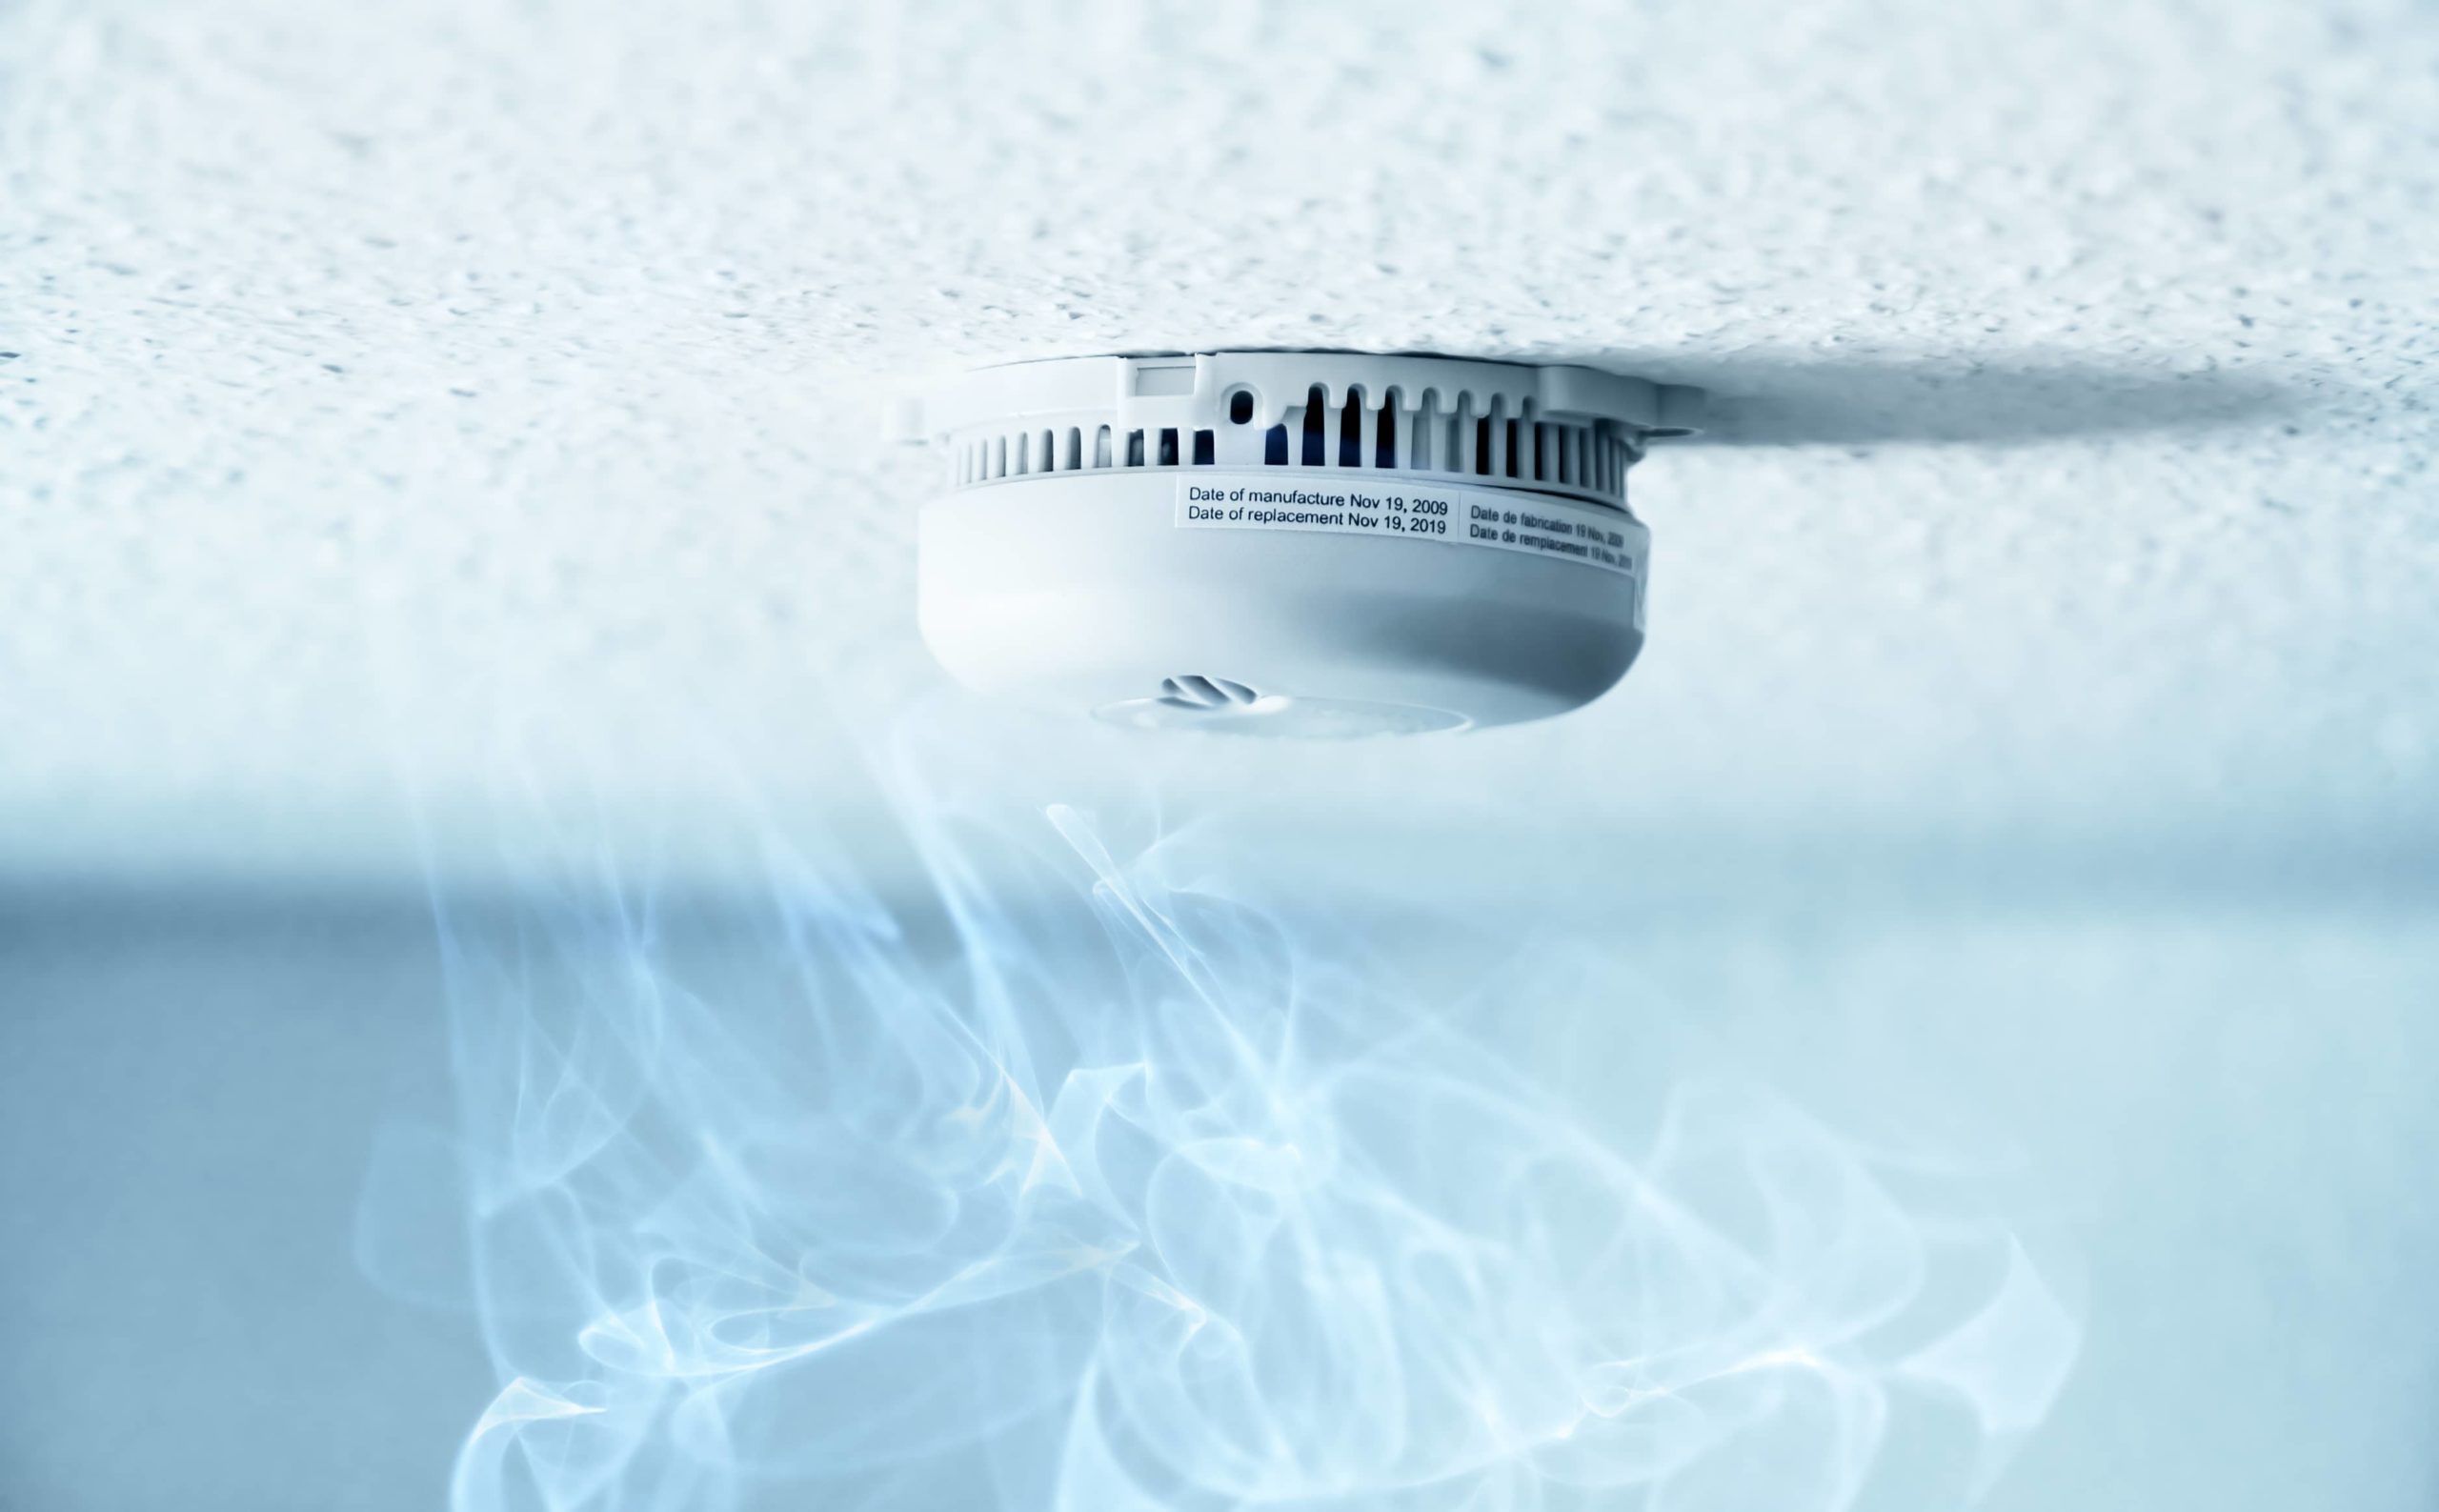 Smoke Alarms Recalled for Risk of Failure to Alert in the Event of a Fire